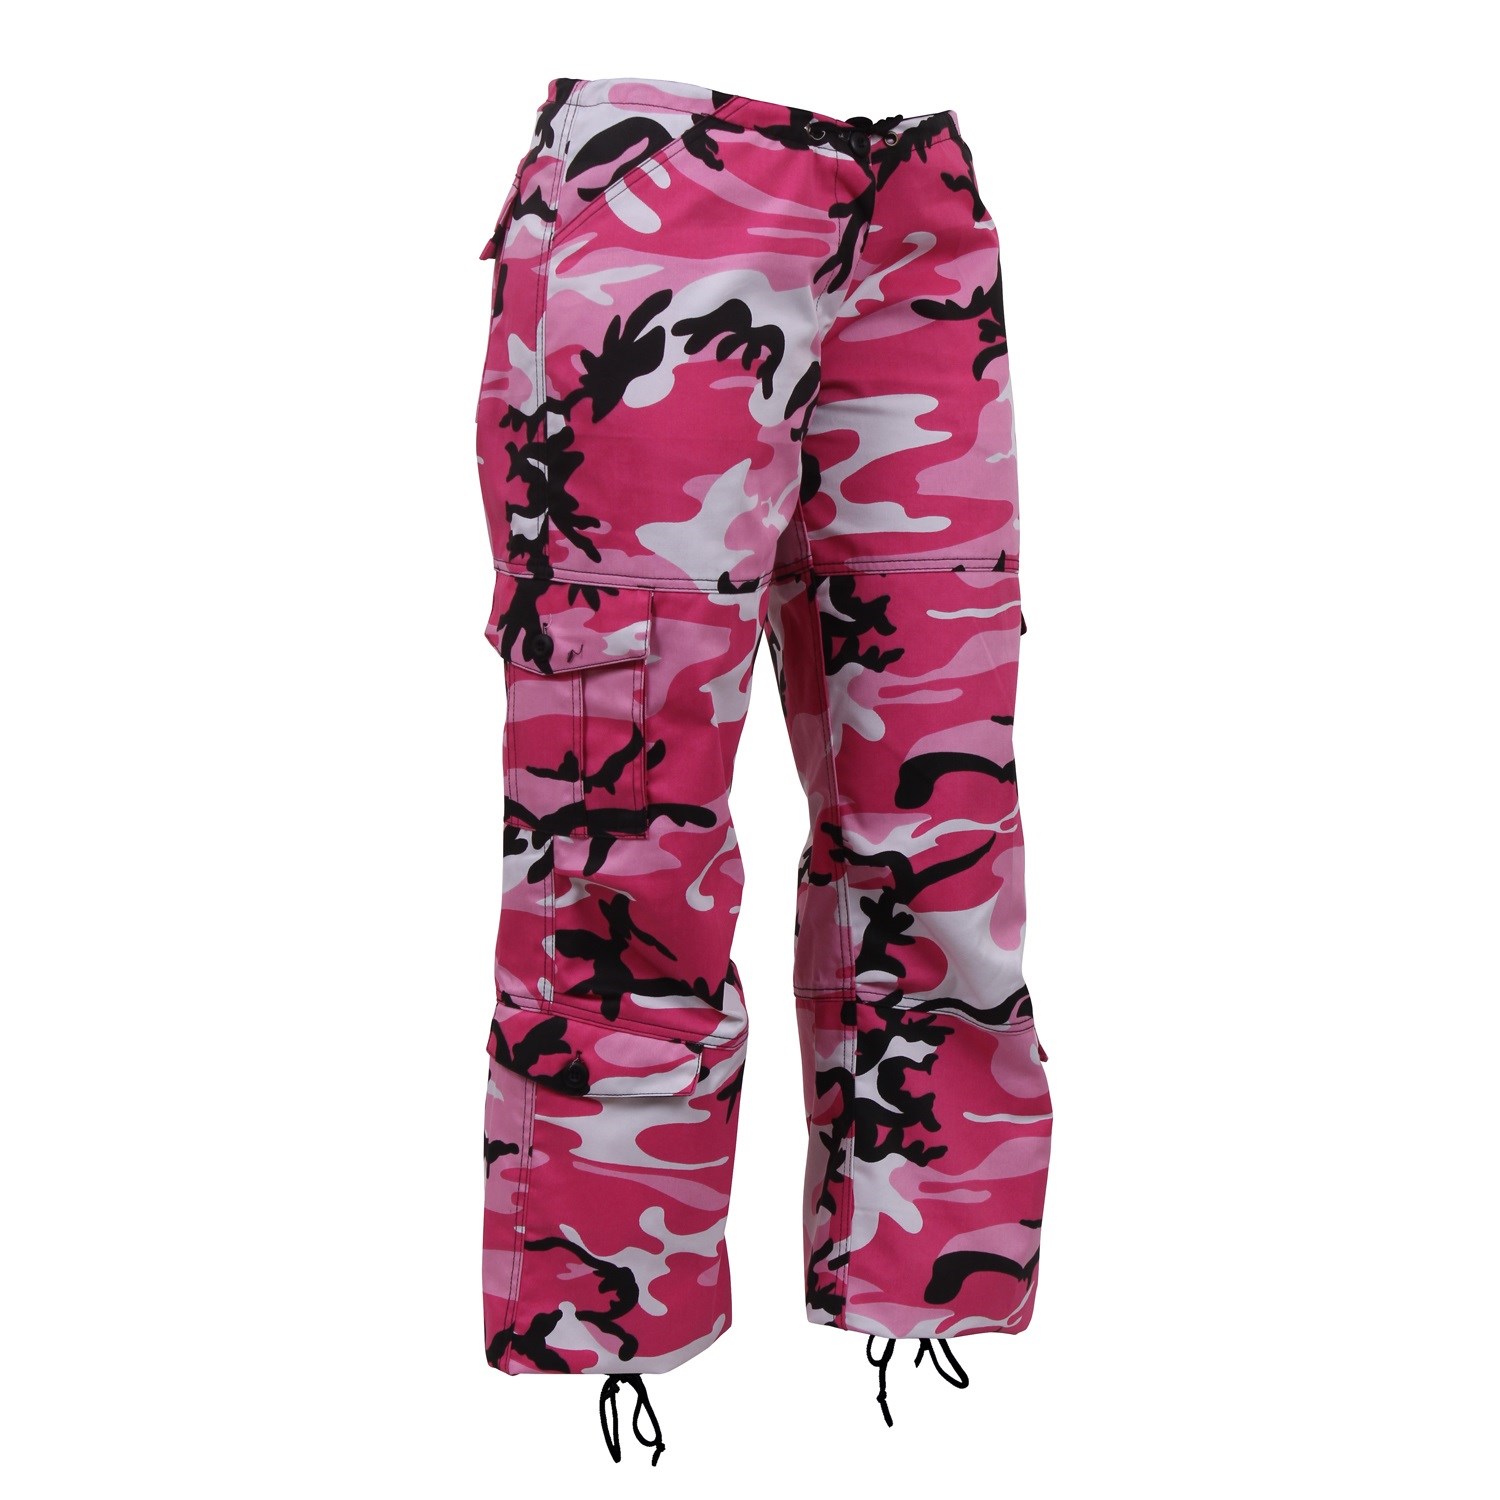 ROTHCO Pants Women´s PARATROOPER PINK CAMO